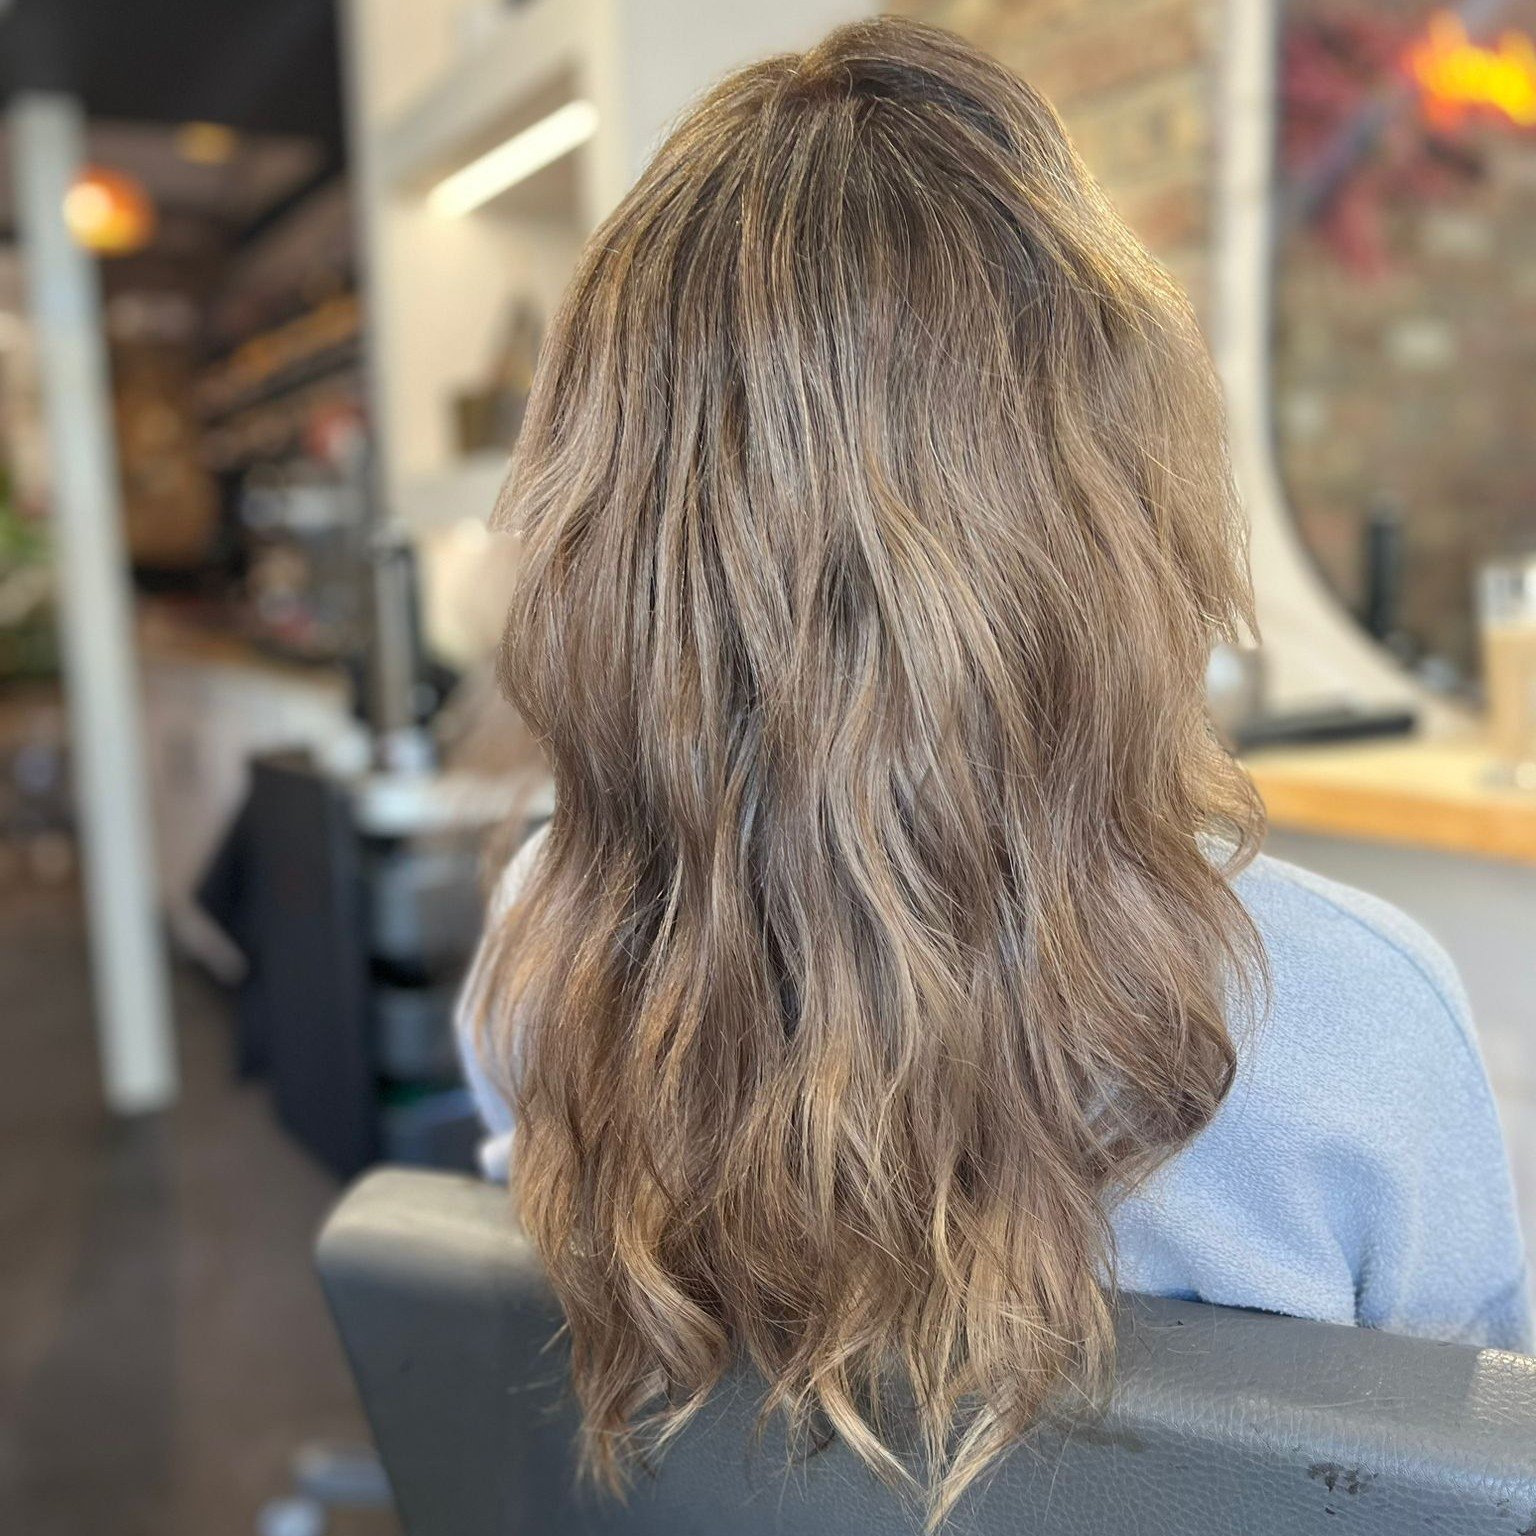 A darker balayage than usual for this lovely client, to embrace being different to her usual bright blonde 💛🤎

Used @wella and styled with @ghdhair 🫶

📸 By @elliethehairfairy 

.
.
.

#hair #wella #wellacolour #wellahair #wellaprofessional #hairi